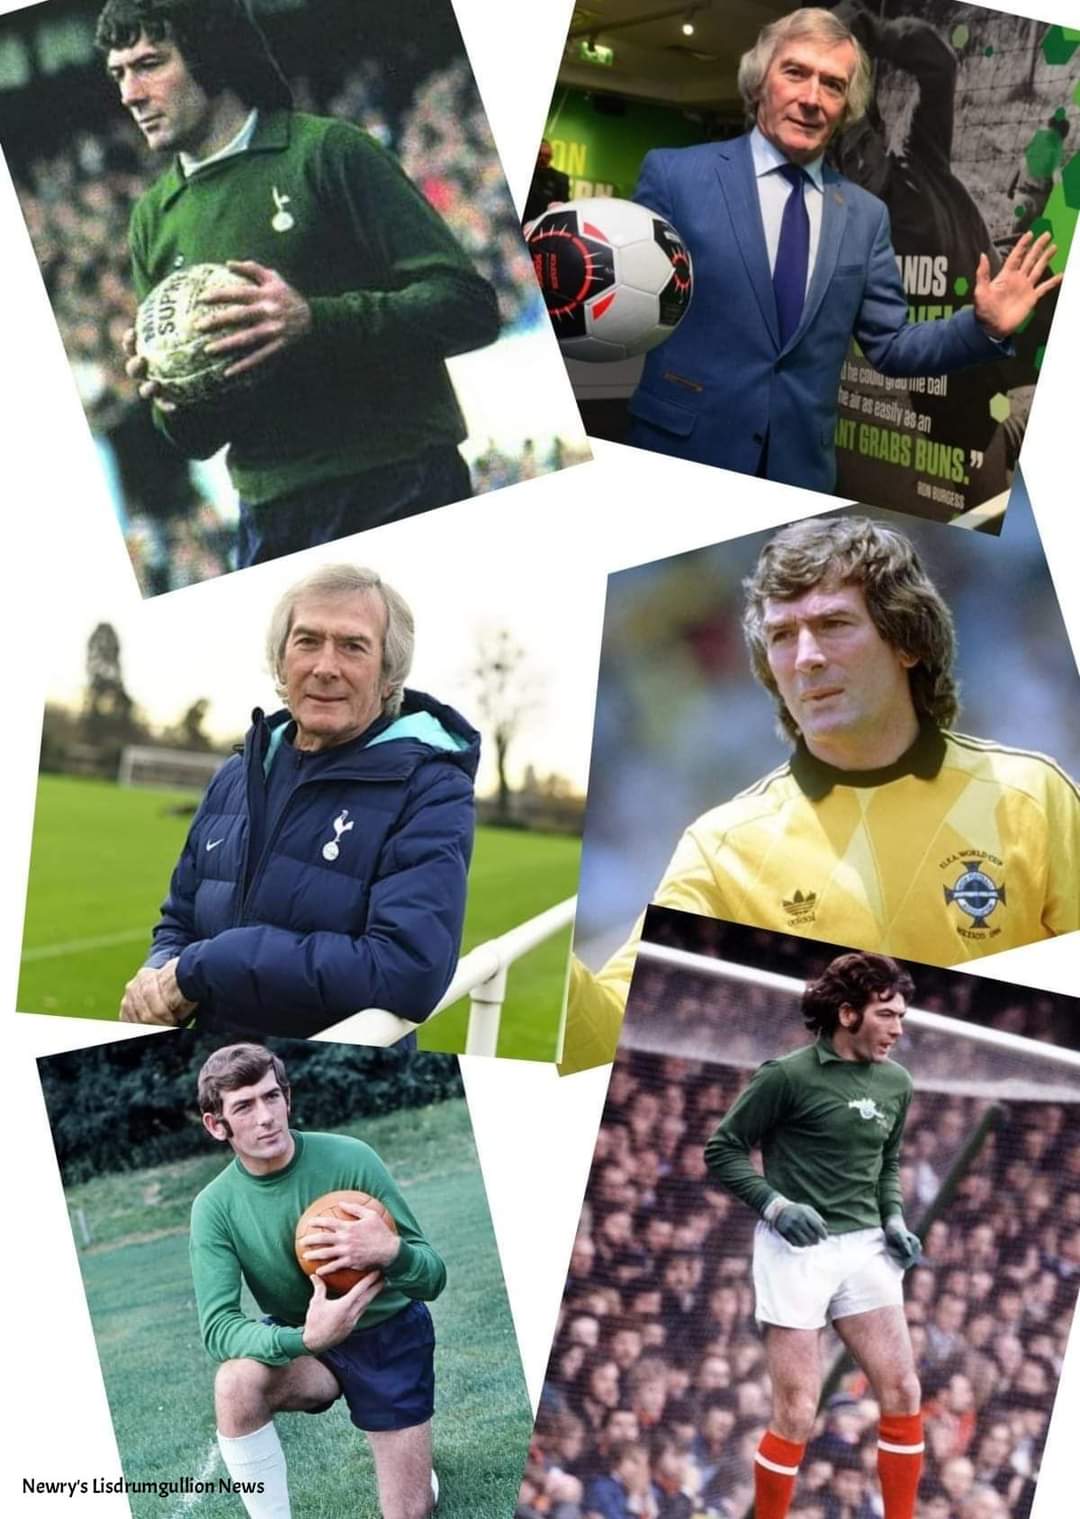 BIG PAT TURNS 78 
Happy birthday to Pat Jennings, who turned 78 years old today. 